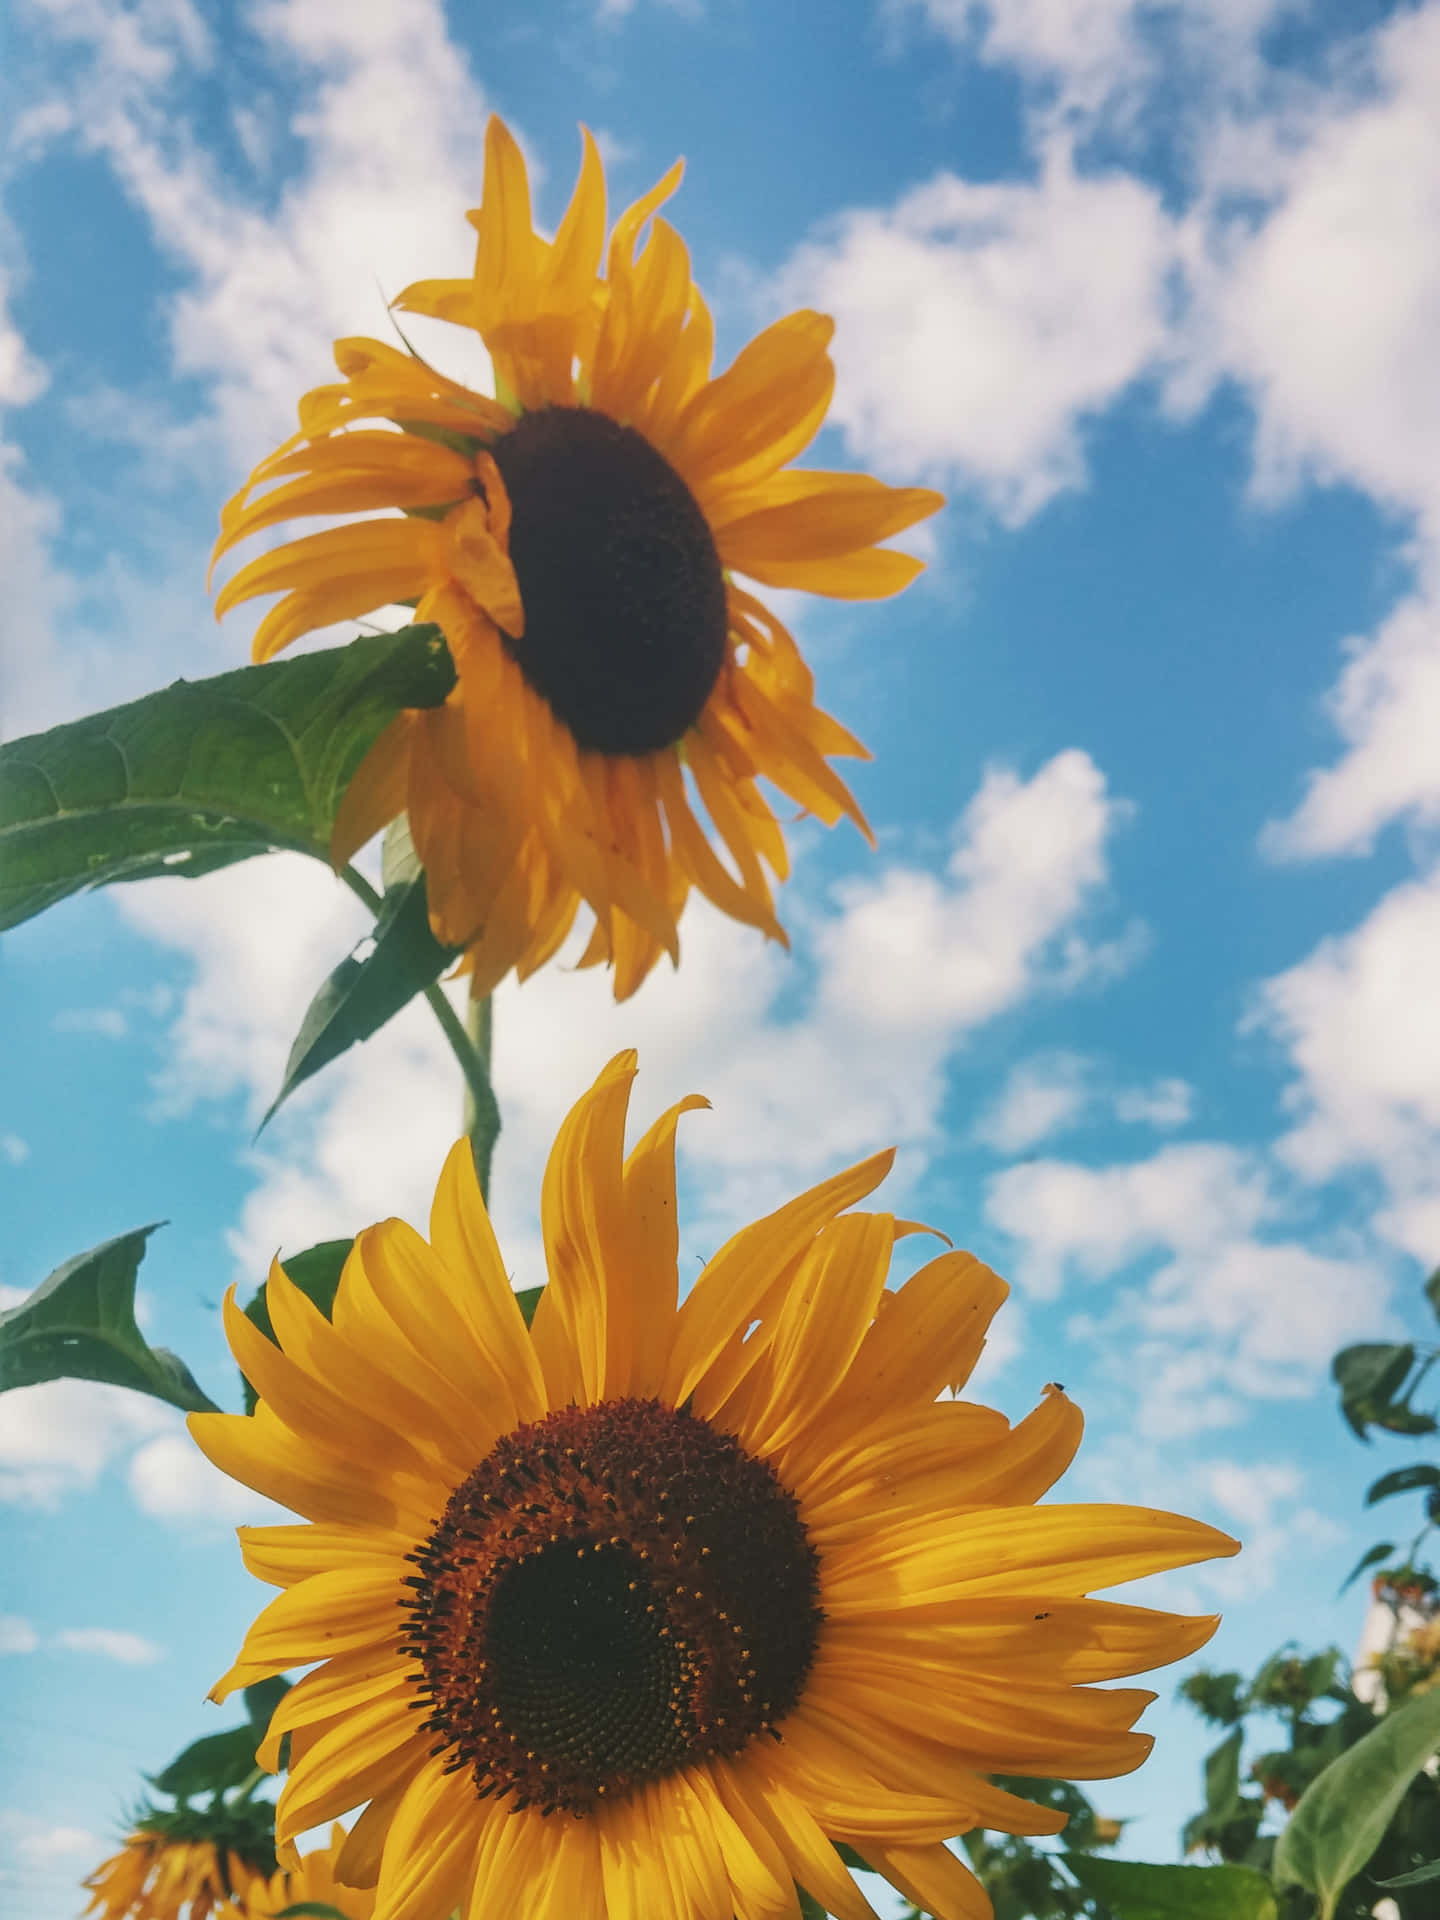 Brighten up any day with a vibrant sunflower Wallpaper